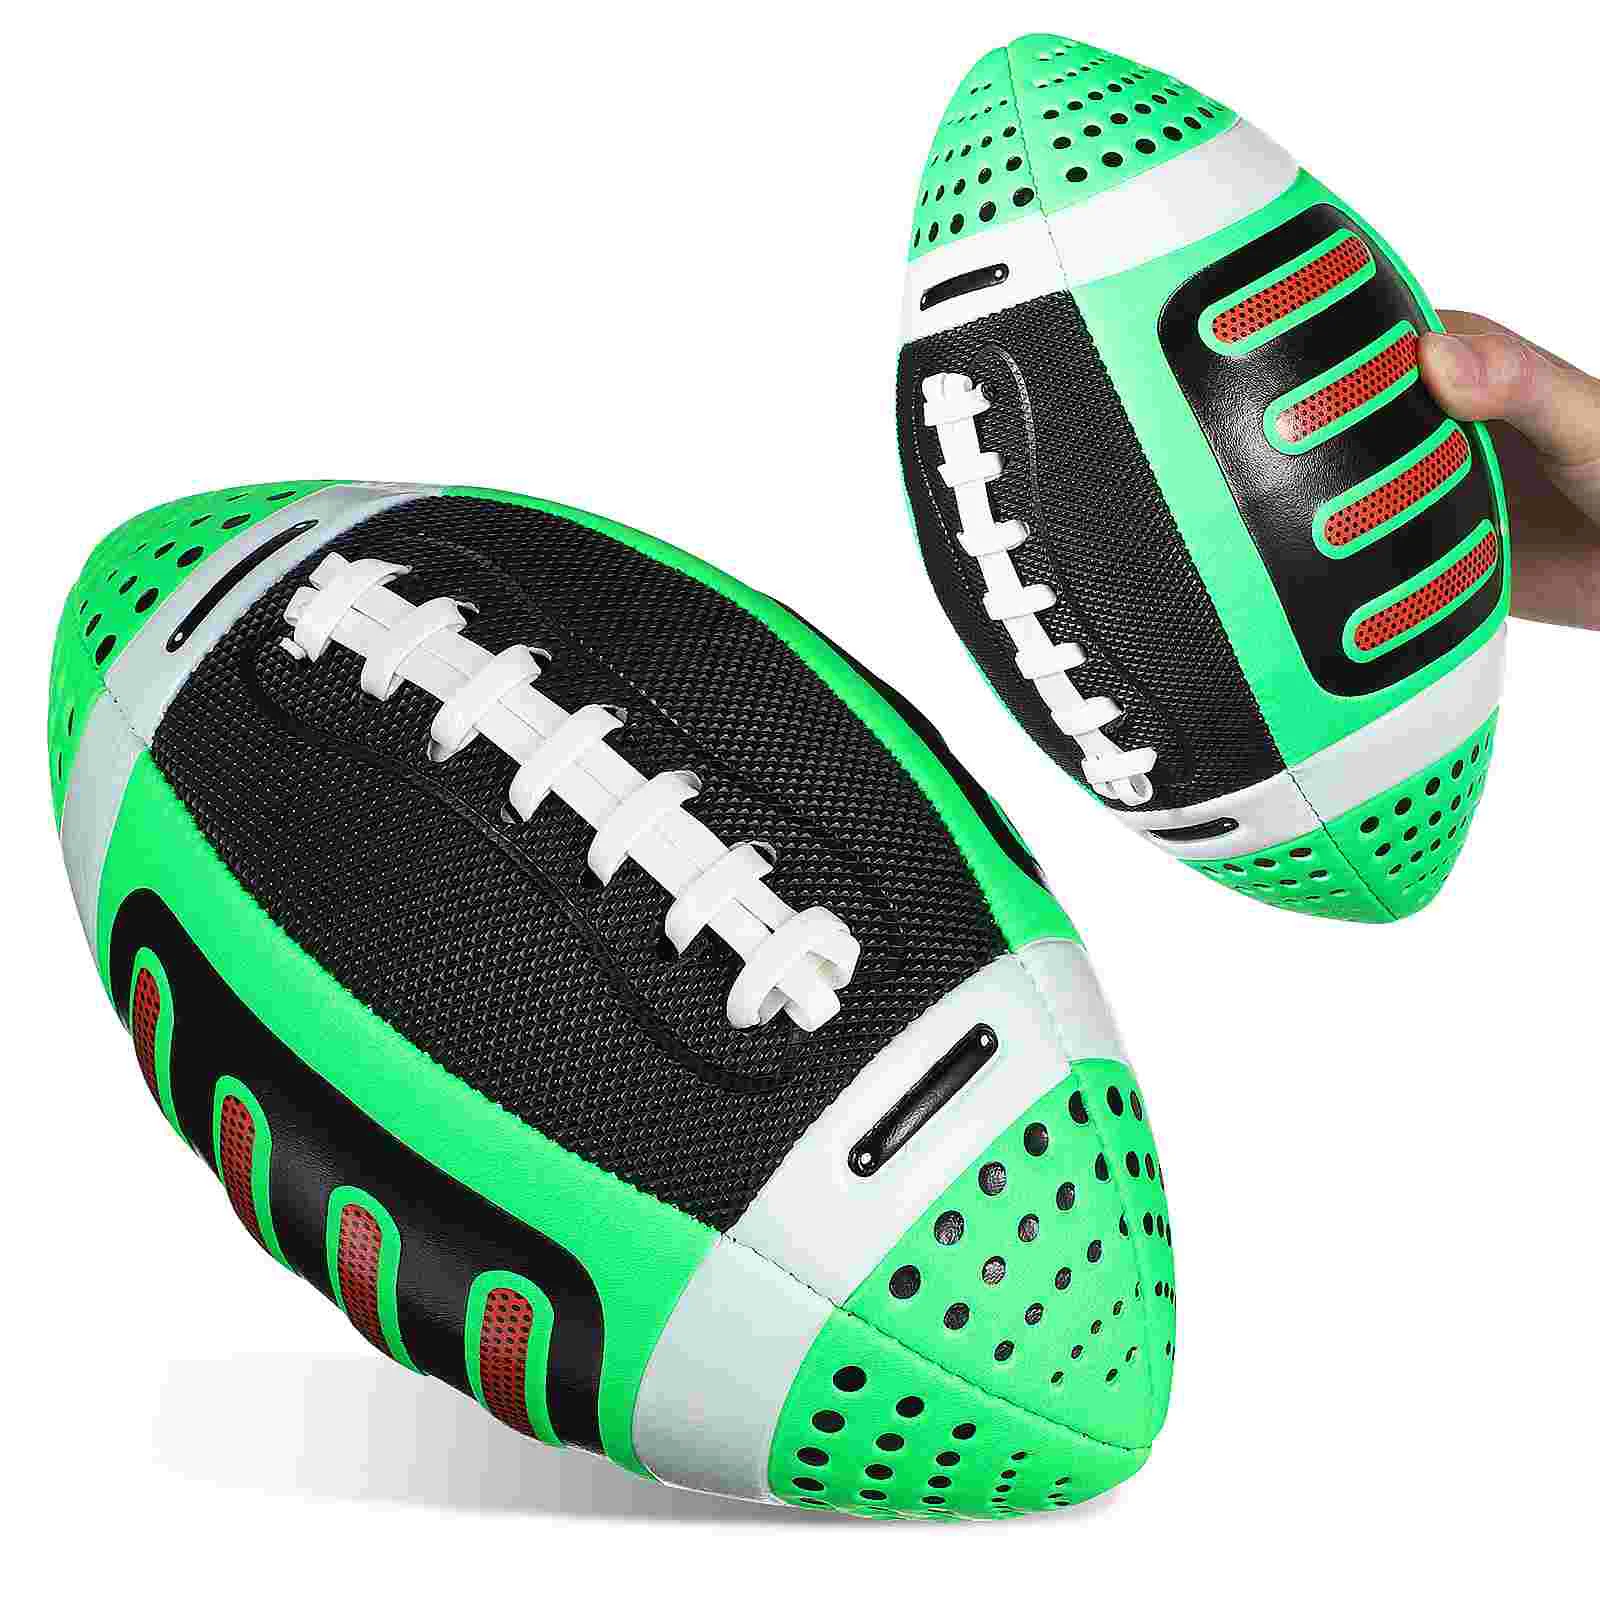 

Toys Rugby Exercising Training Outdoor Kids Football Portable Pu Gear Colored Toddle